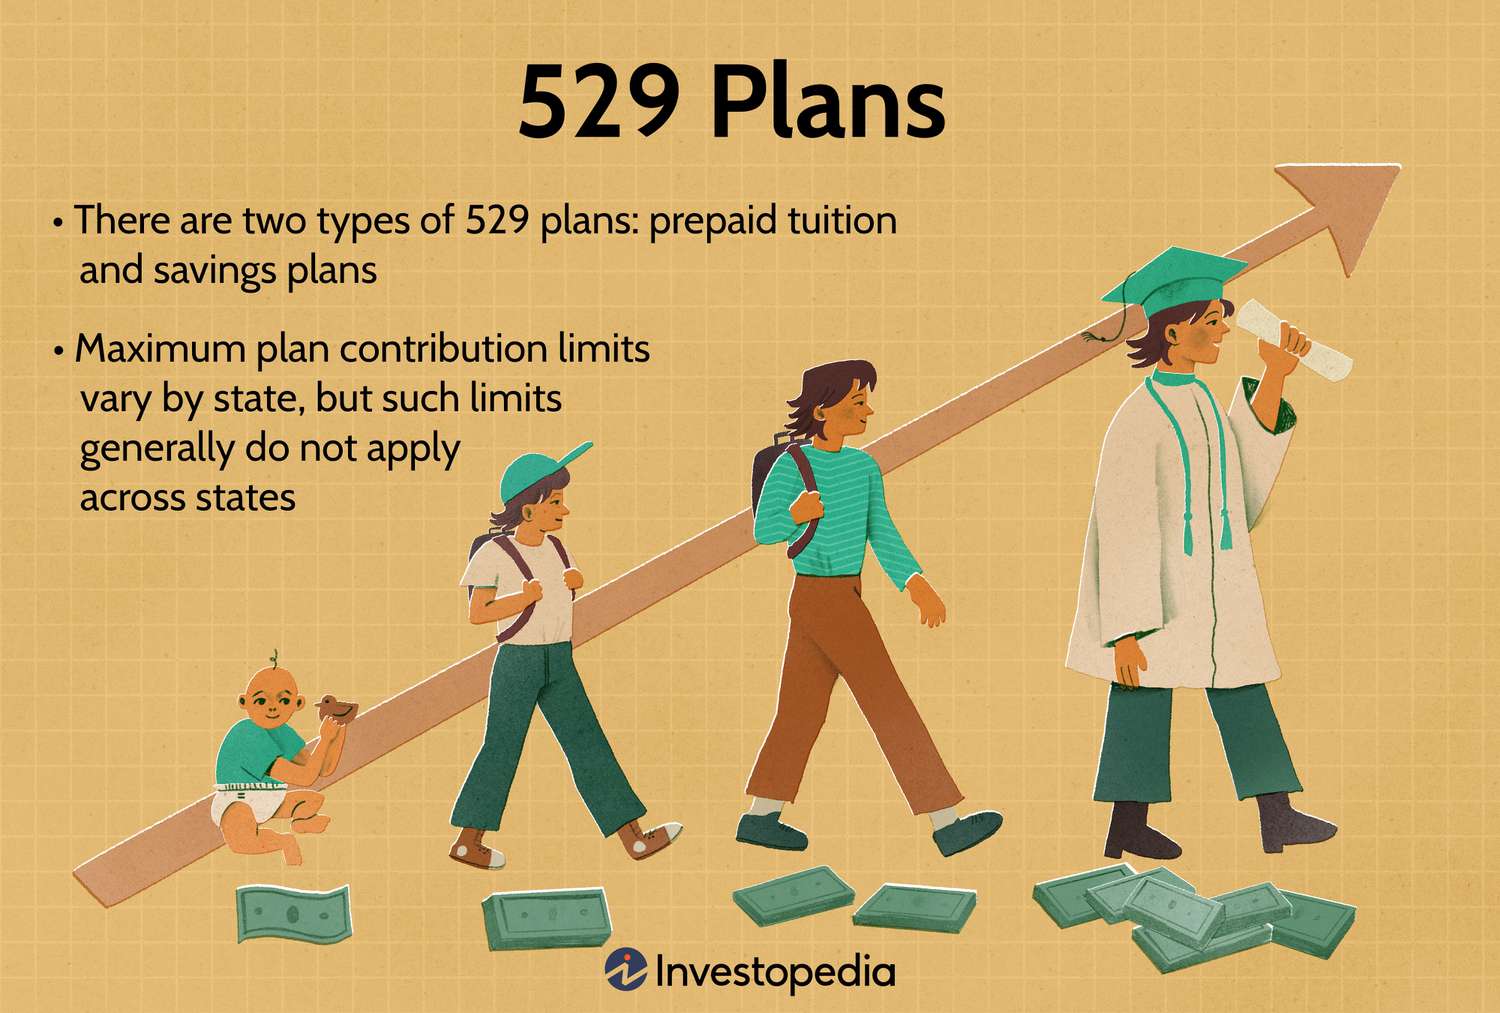 what is the benefit of a 529 education saving plan